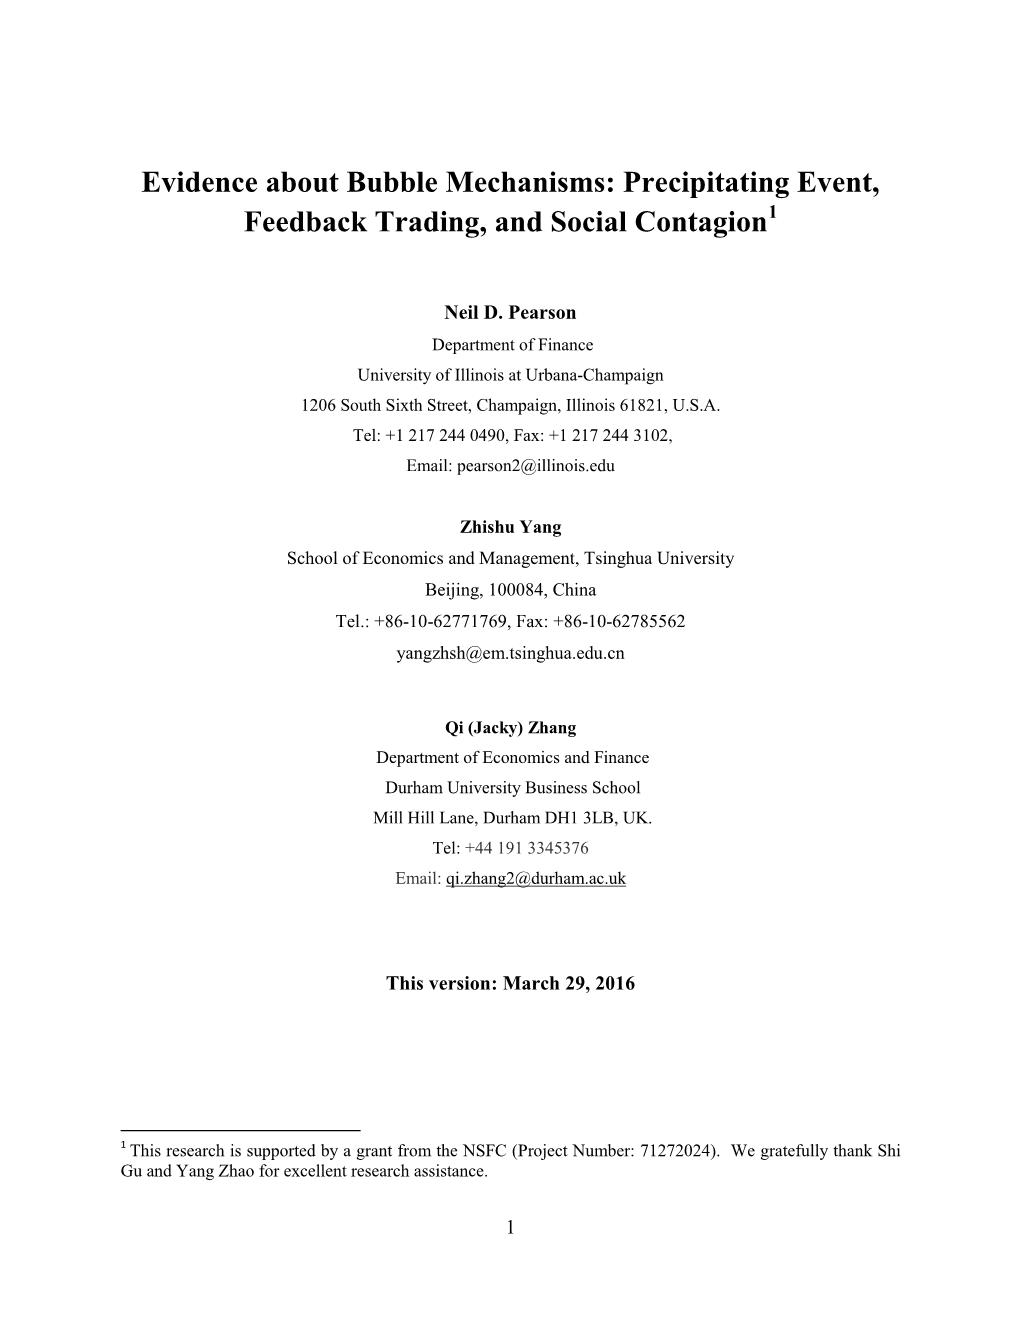 Evidence About Bubble Mechanisms: Precipitating Event, Feedback Trading, and Social Contagion1